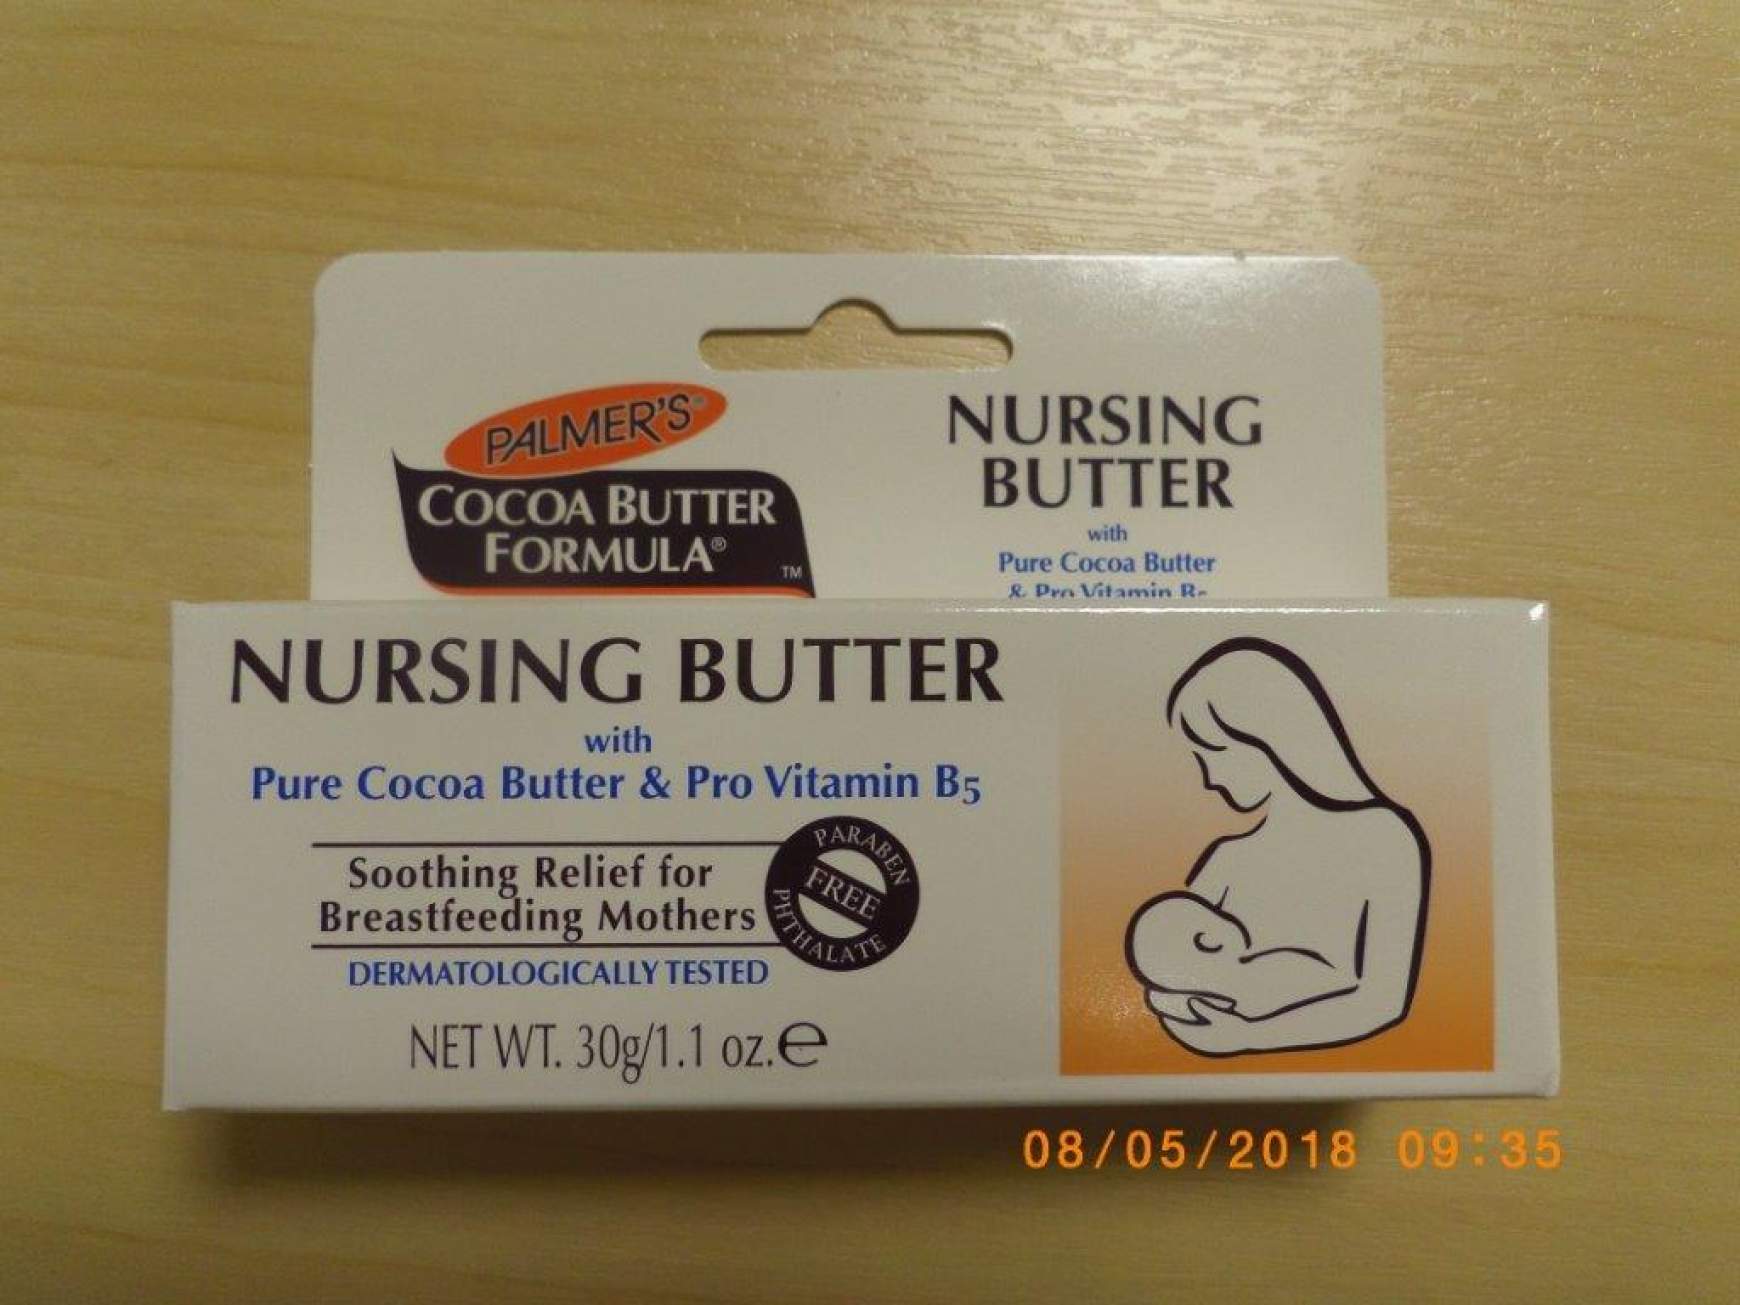 Nursing Butter with Pure Cocoa Butter, gyártó: E. T. Browne Drugs Co.